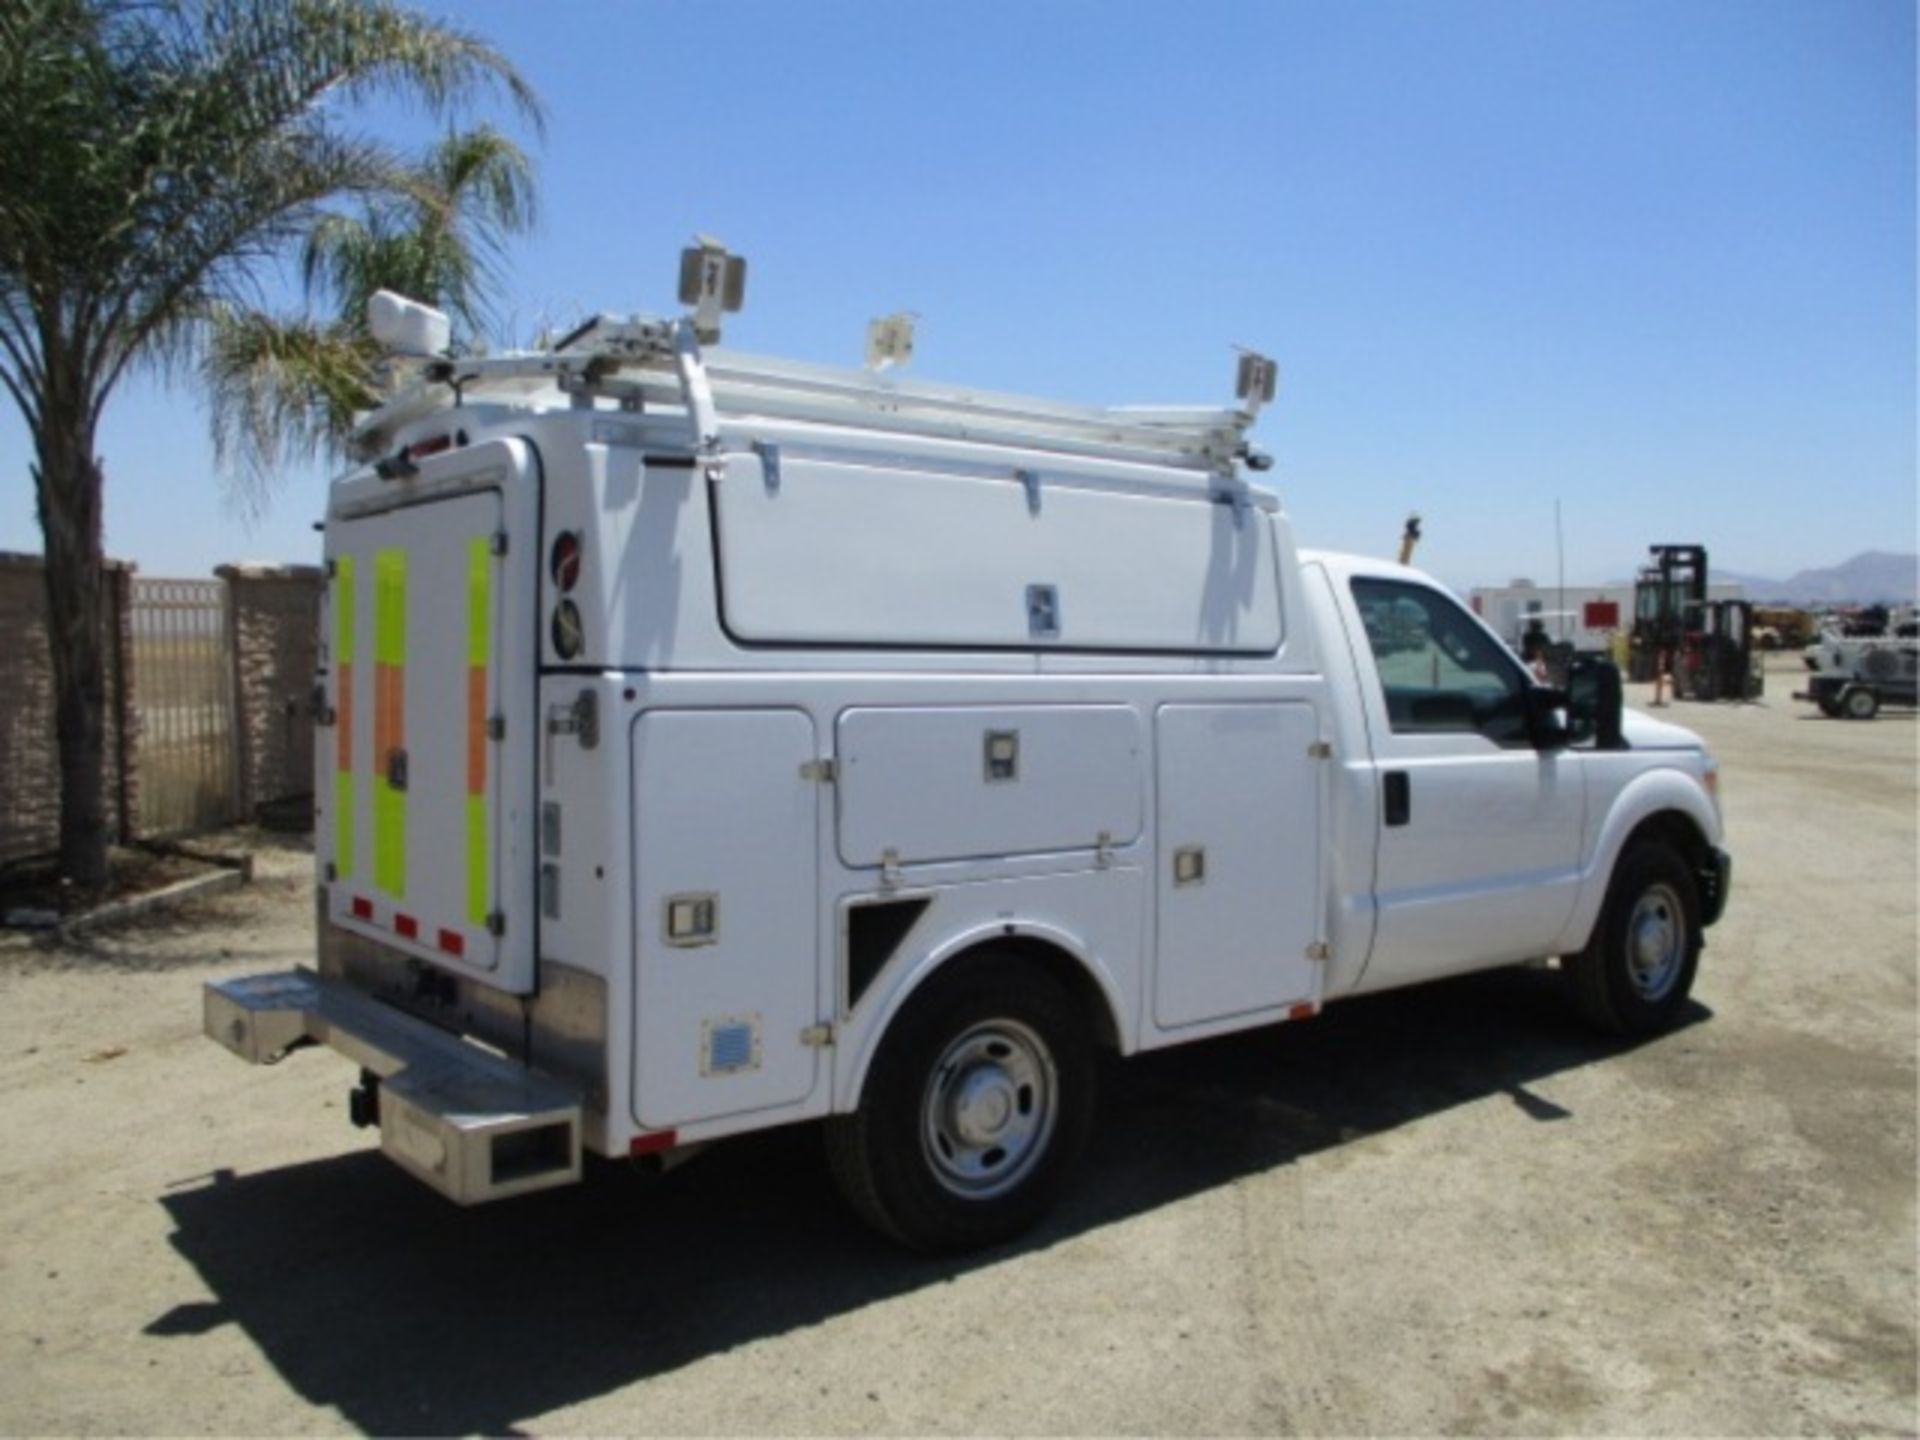 2013 Ford F350 SD Utility Truck, 6.2L V8 Gas, Automatic, Enclosed Utility Body, Onan Gas - Image 15 of 84